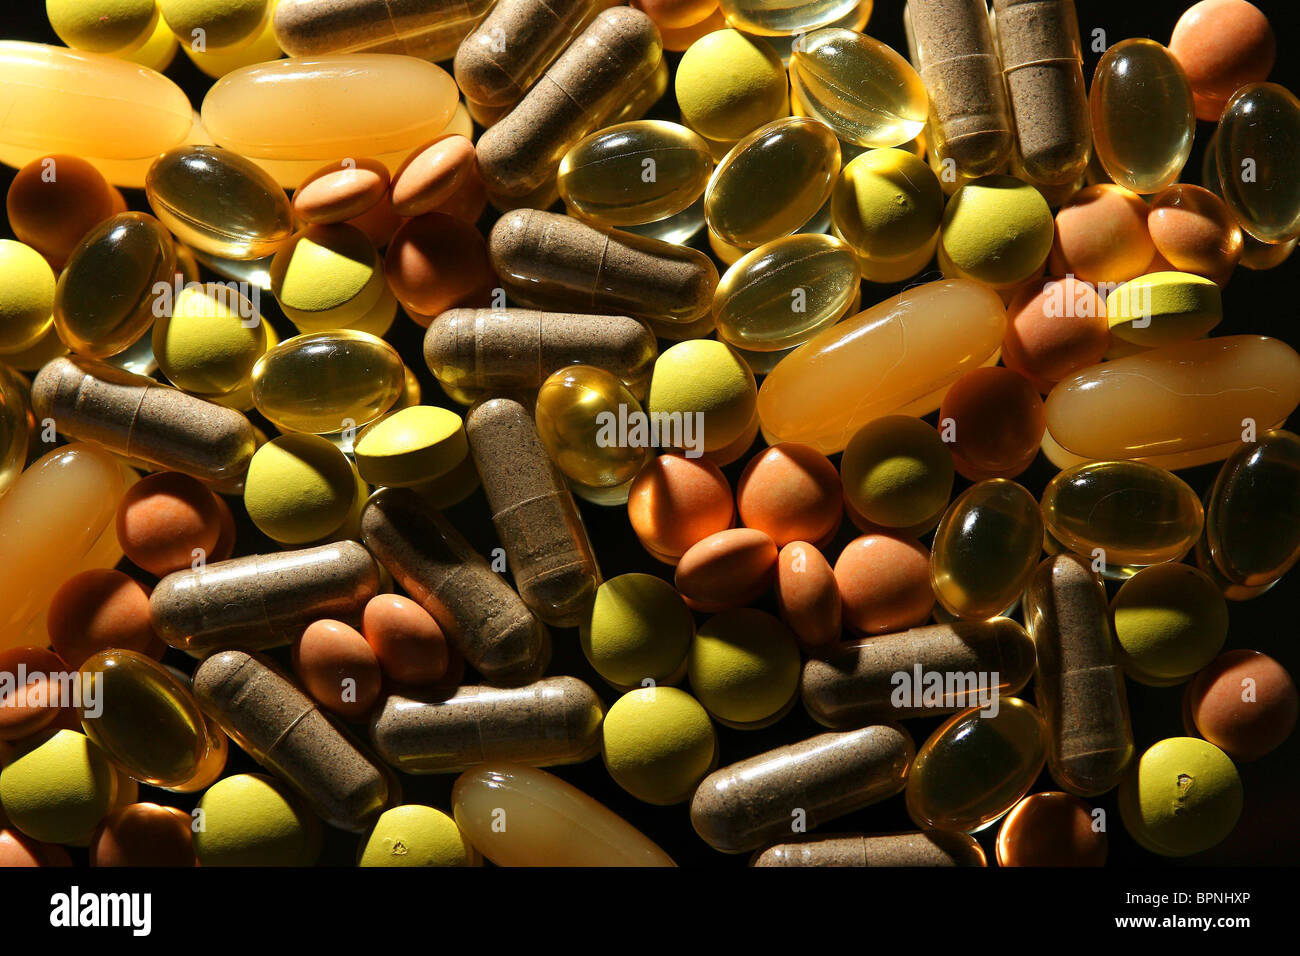 Vitamins. Picture by James Boardman. Stock Photo